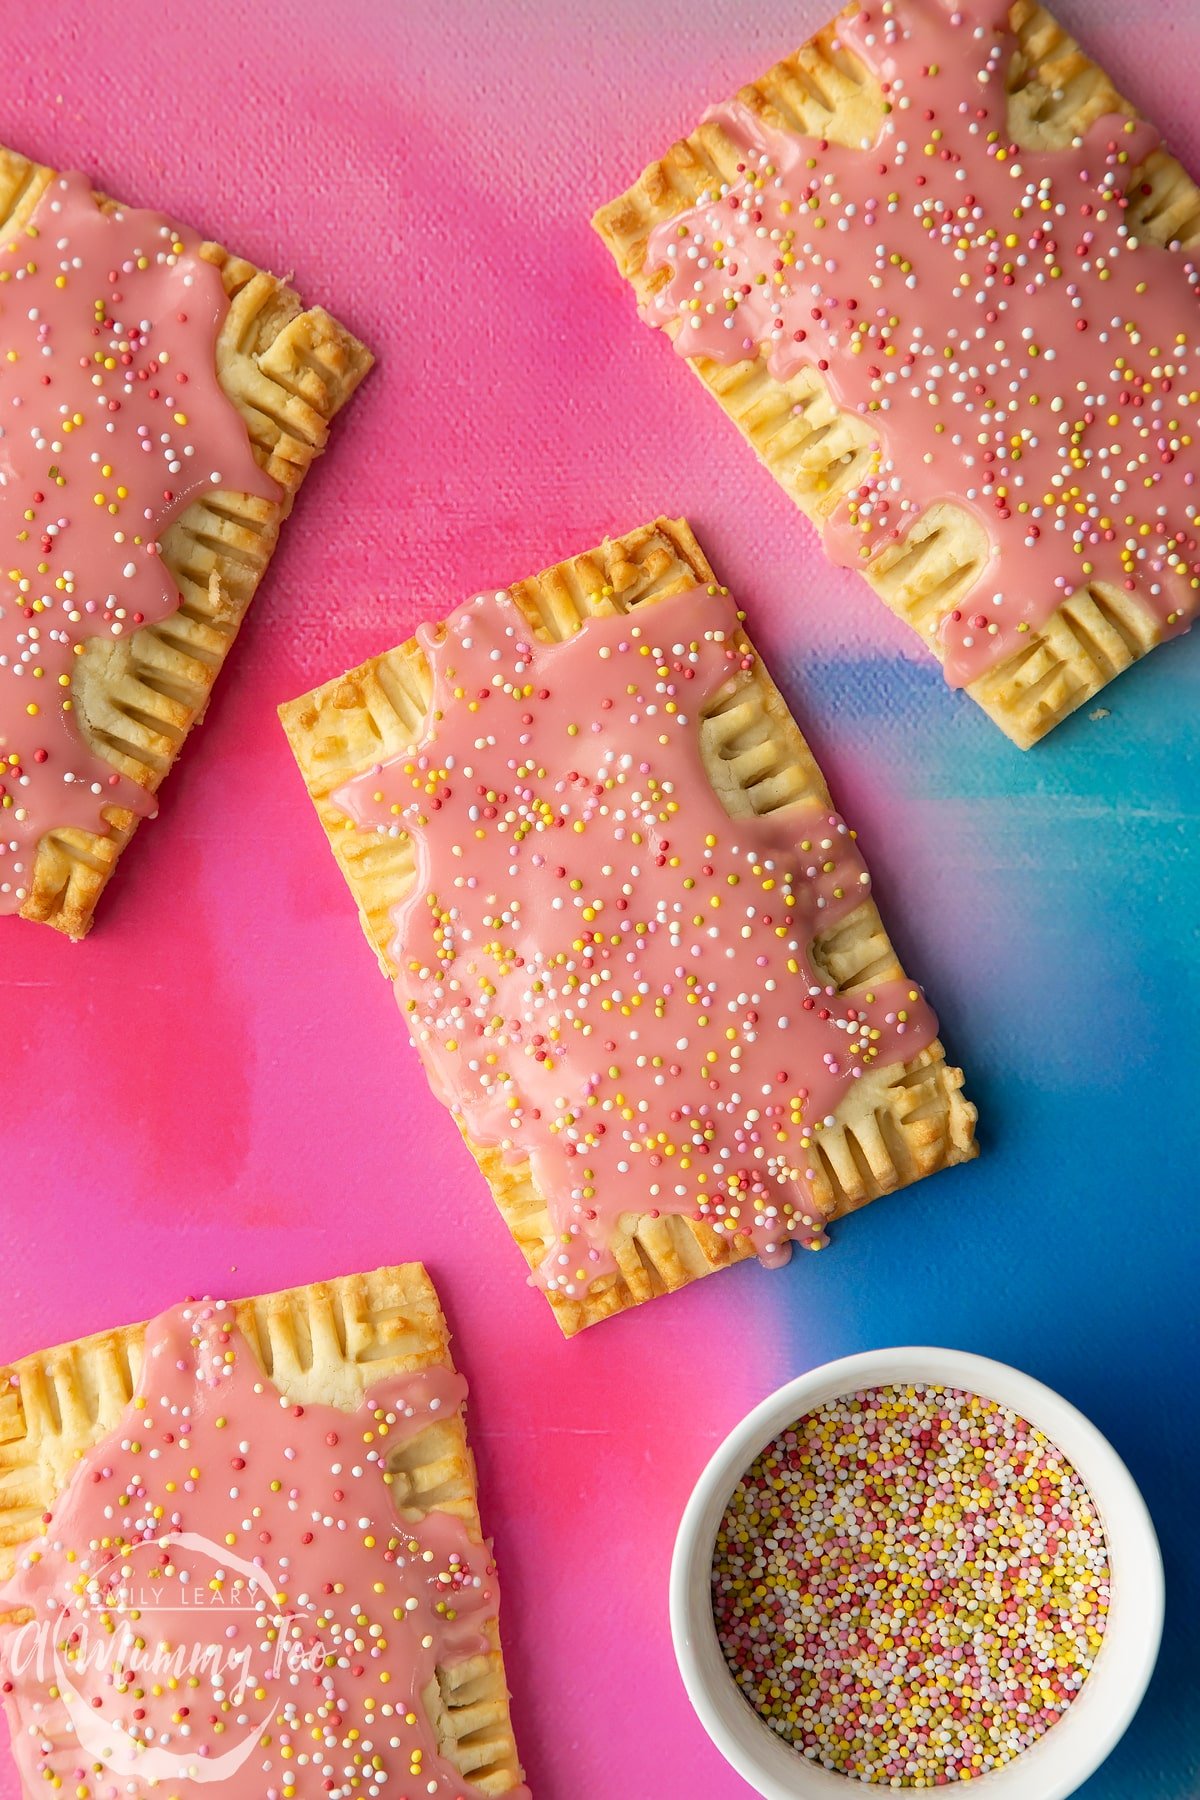 Gluten free pop tarts with pink icing and pastel sprinkles on a bright pink and blue backdrop.